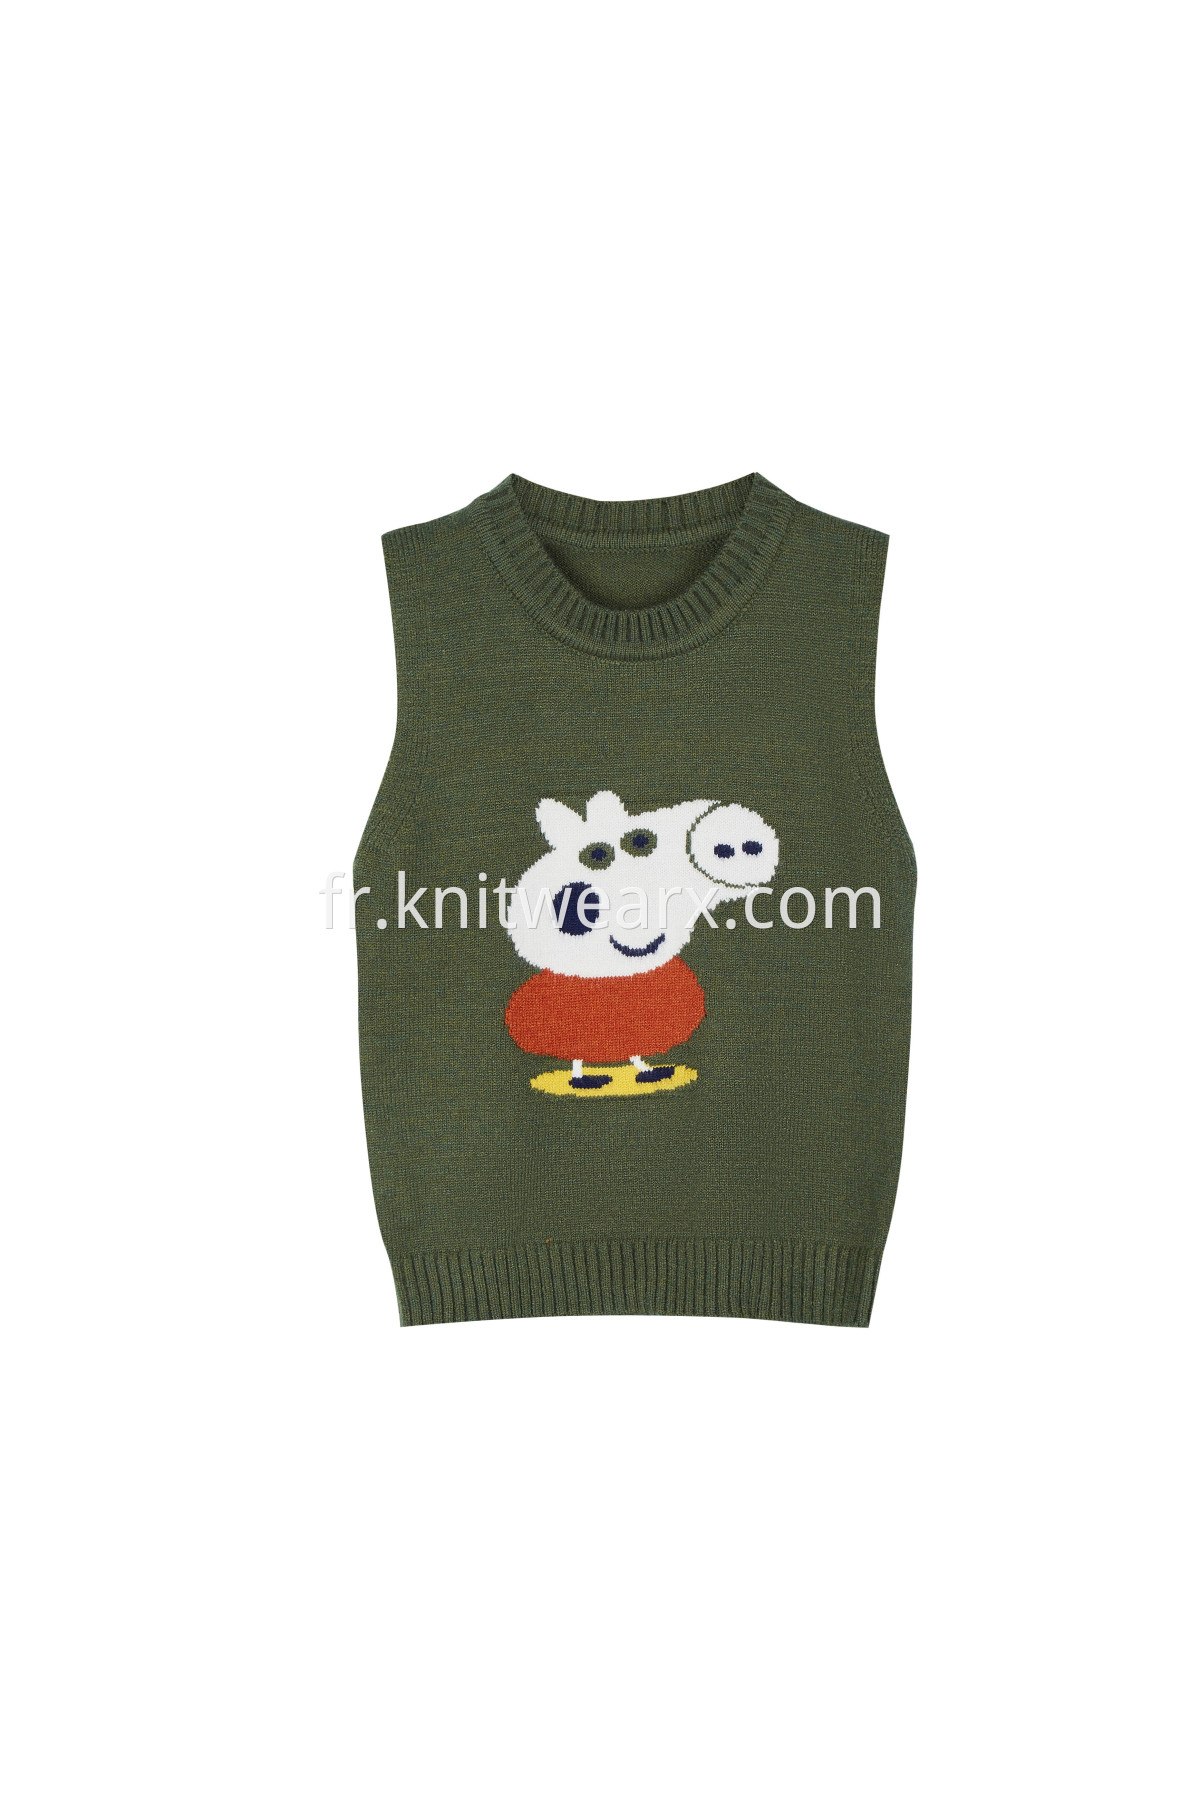 Boy's Lovely Peggy Crew Neck Jaquard Knitted Vest Pullover Sweater Top